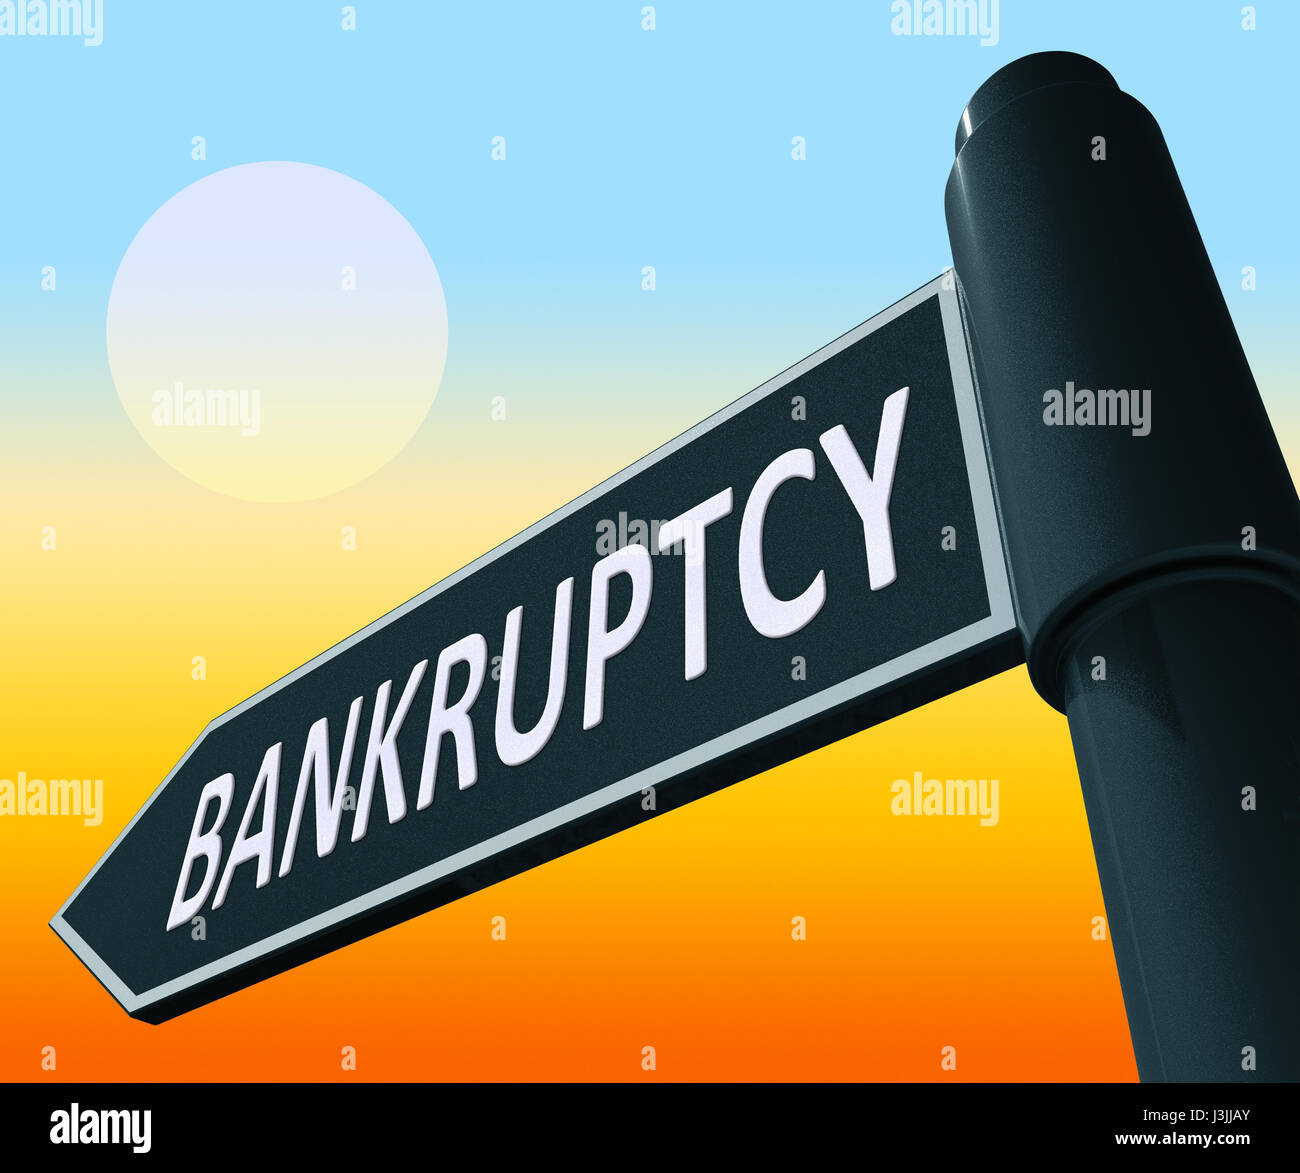 Bankruptcy Road Sign Representing Bad Debt And Arrears 3d Illustration Stock Photo